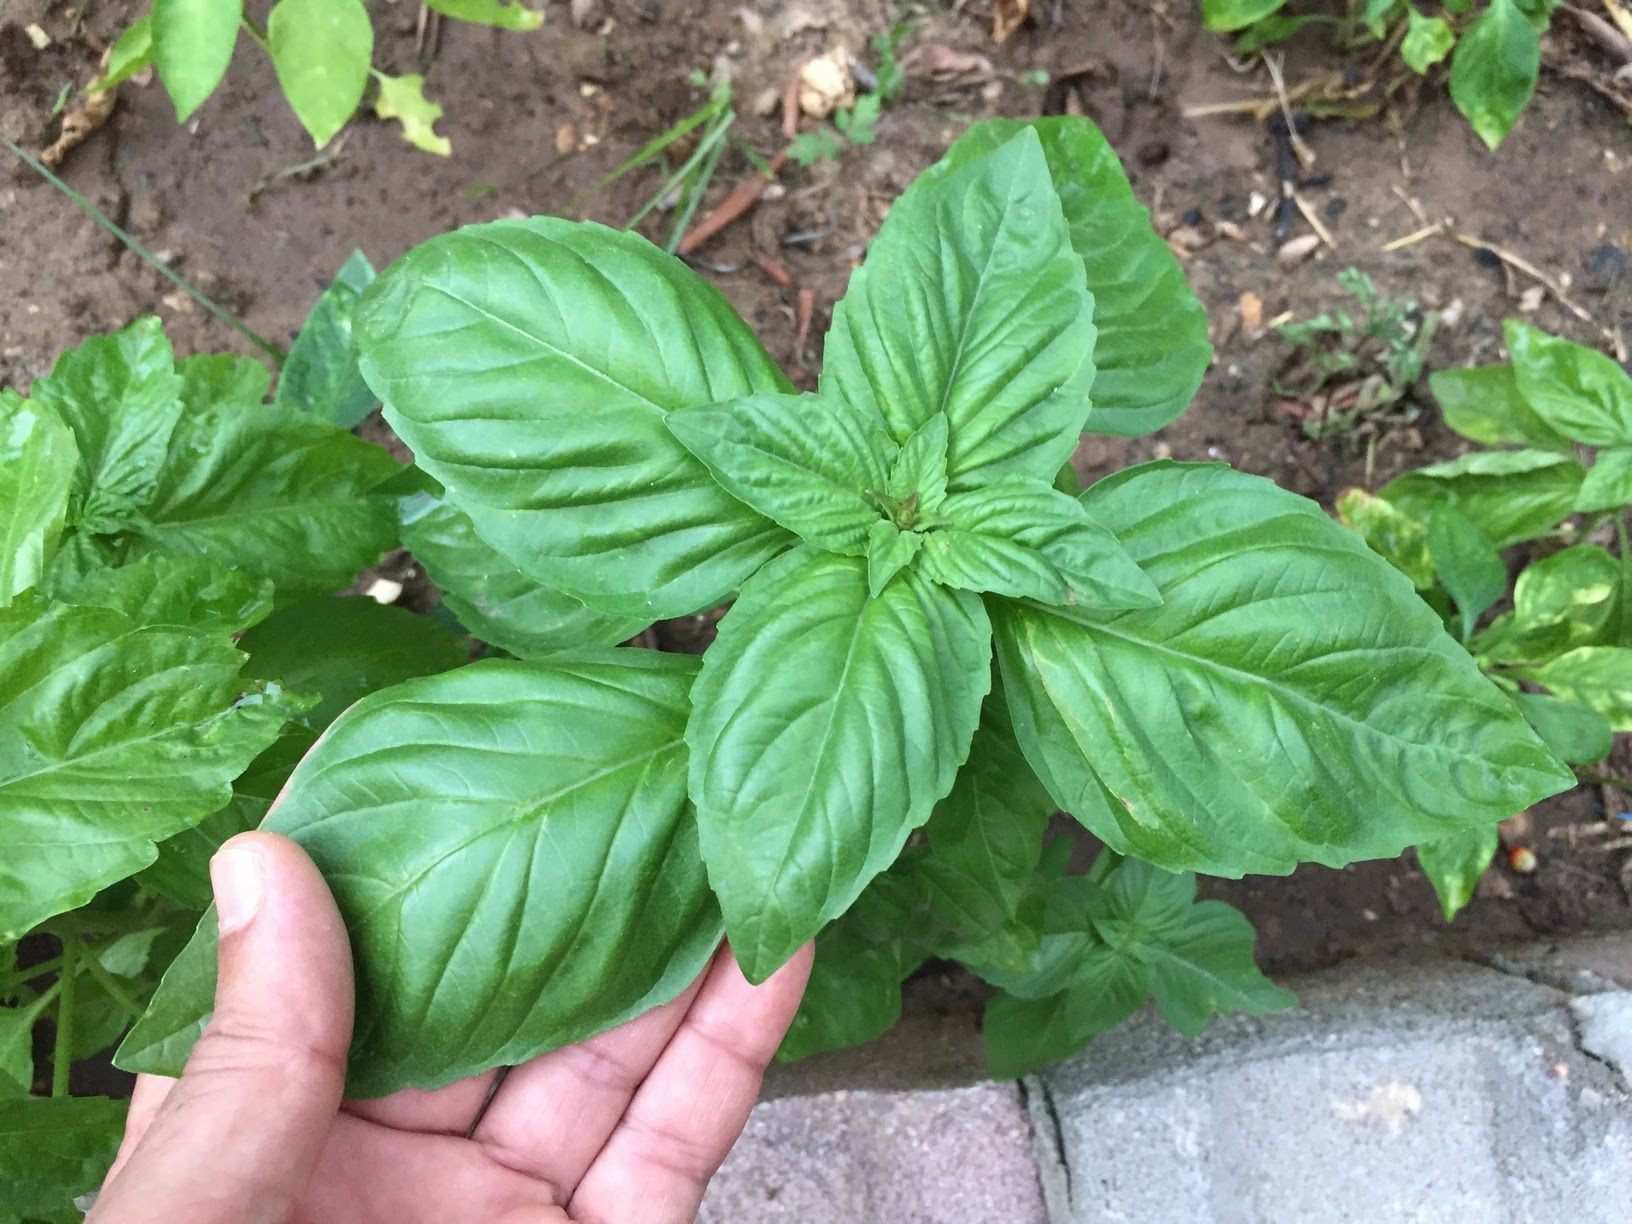 Basil is called by many names like sweet basil or even Thai basil, but all of its common names refer to the herb's botanical name, Ocimum basilicum.